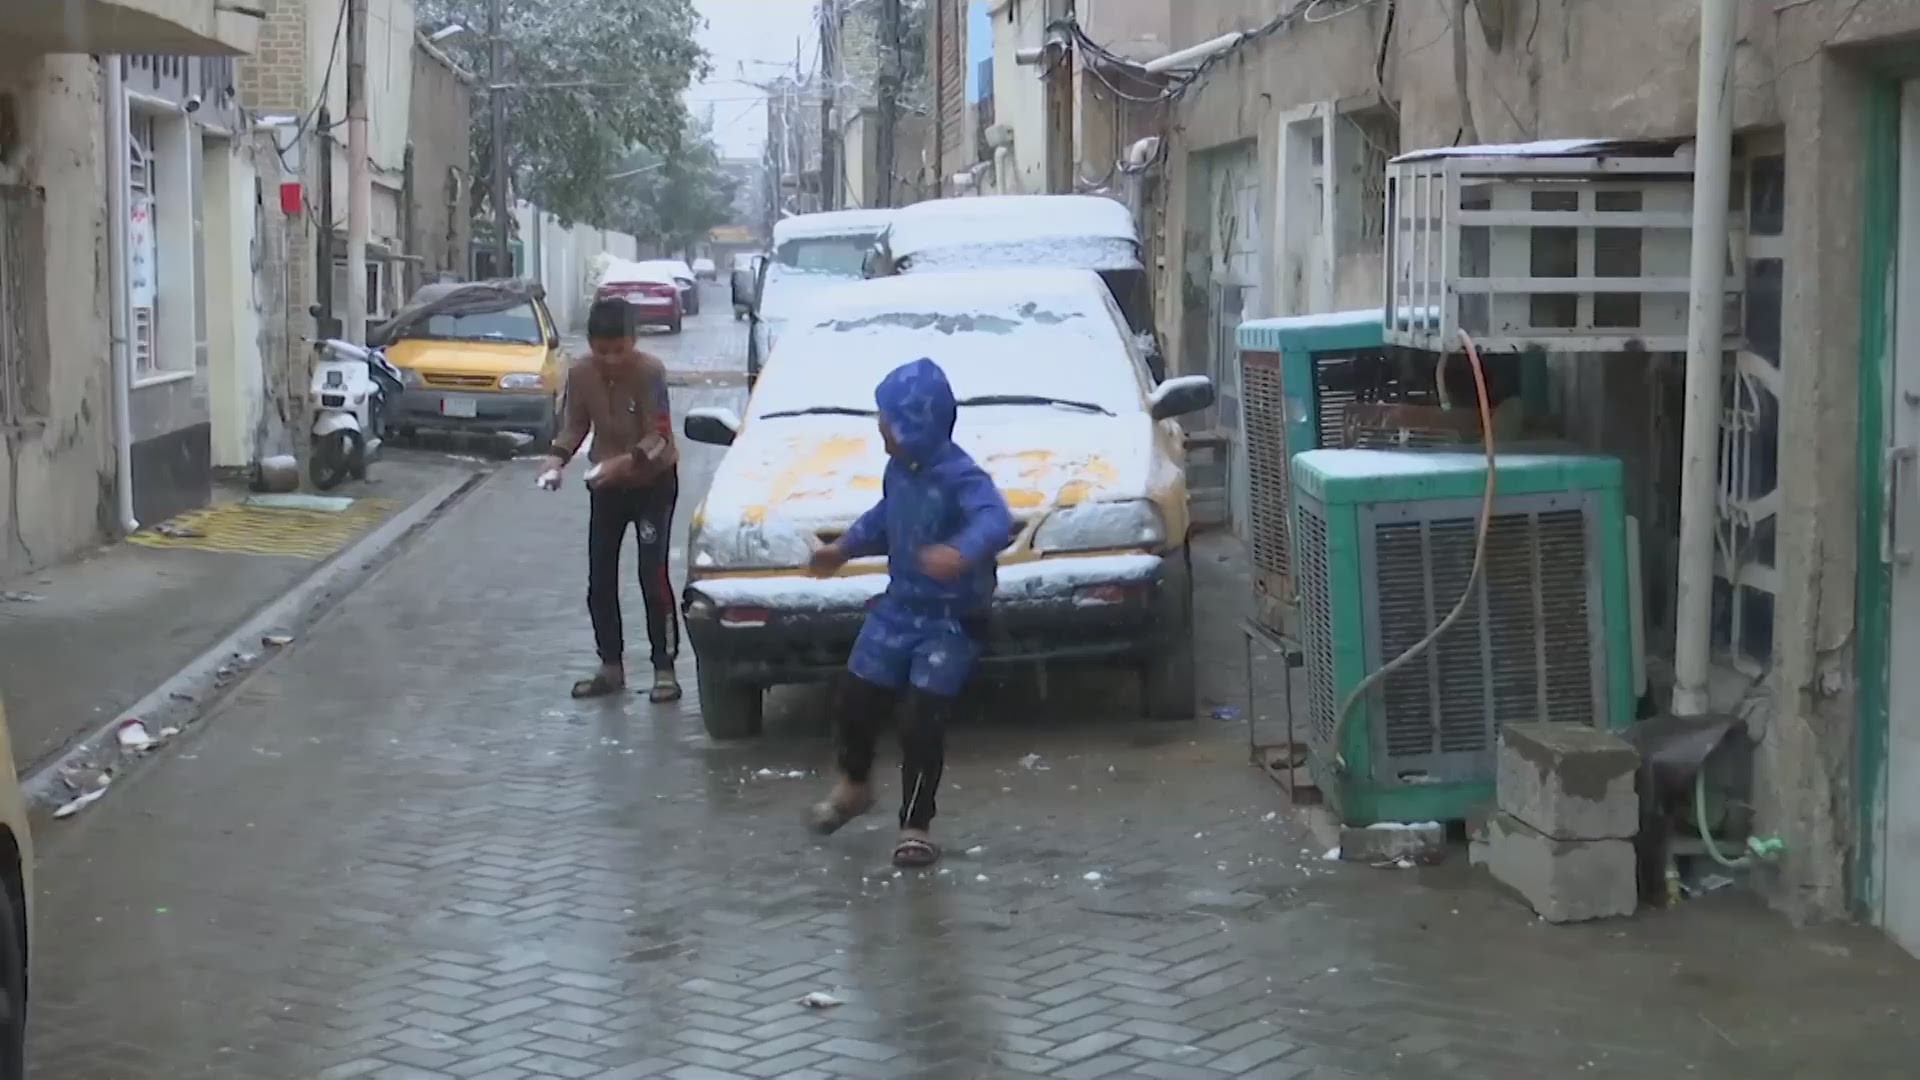 Snow fell across the Iraqi capital Baghdad for the first time in a decade on Tuesday, as morning temperatures uncharacteristically hovered around freezing.